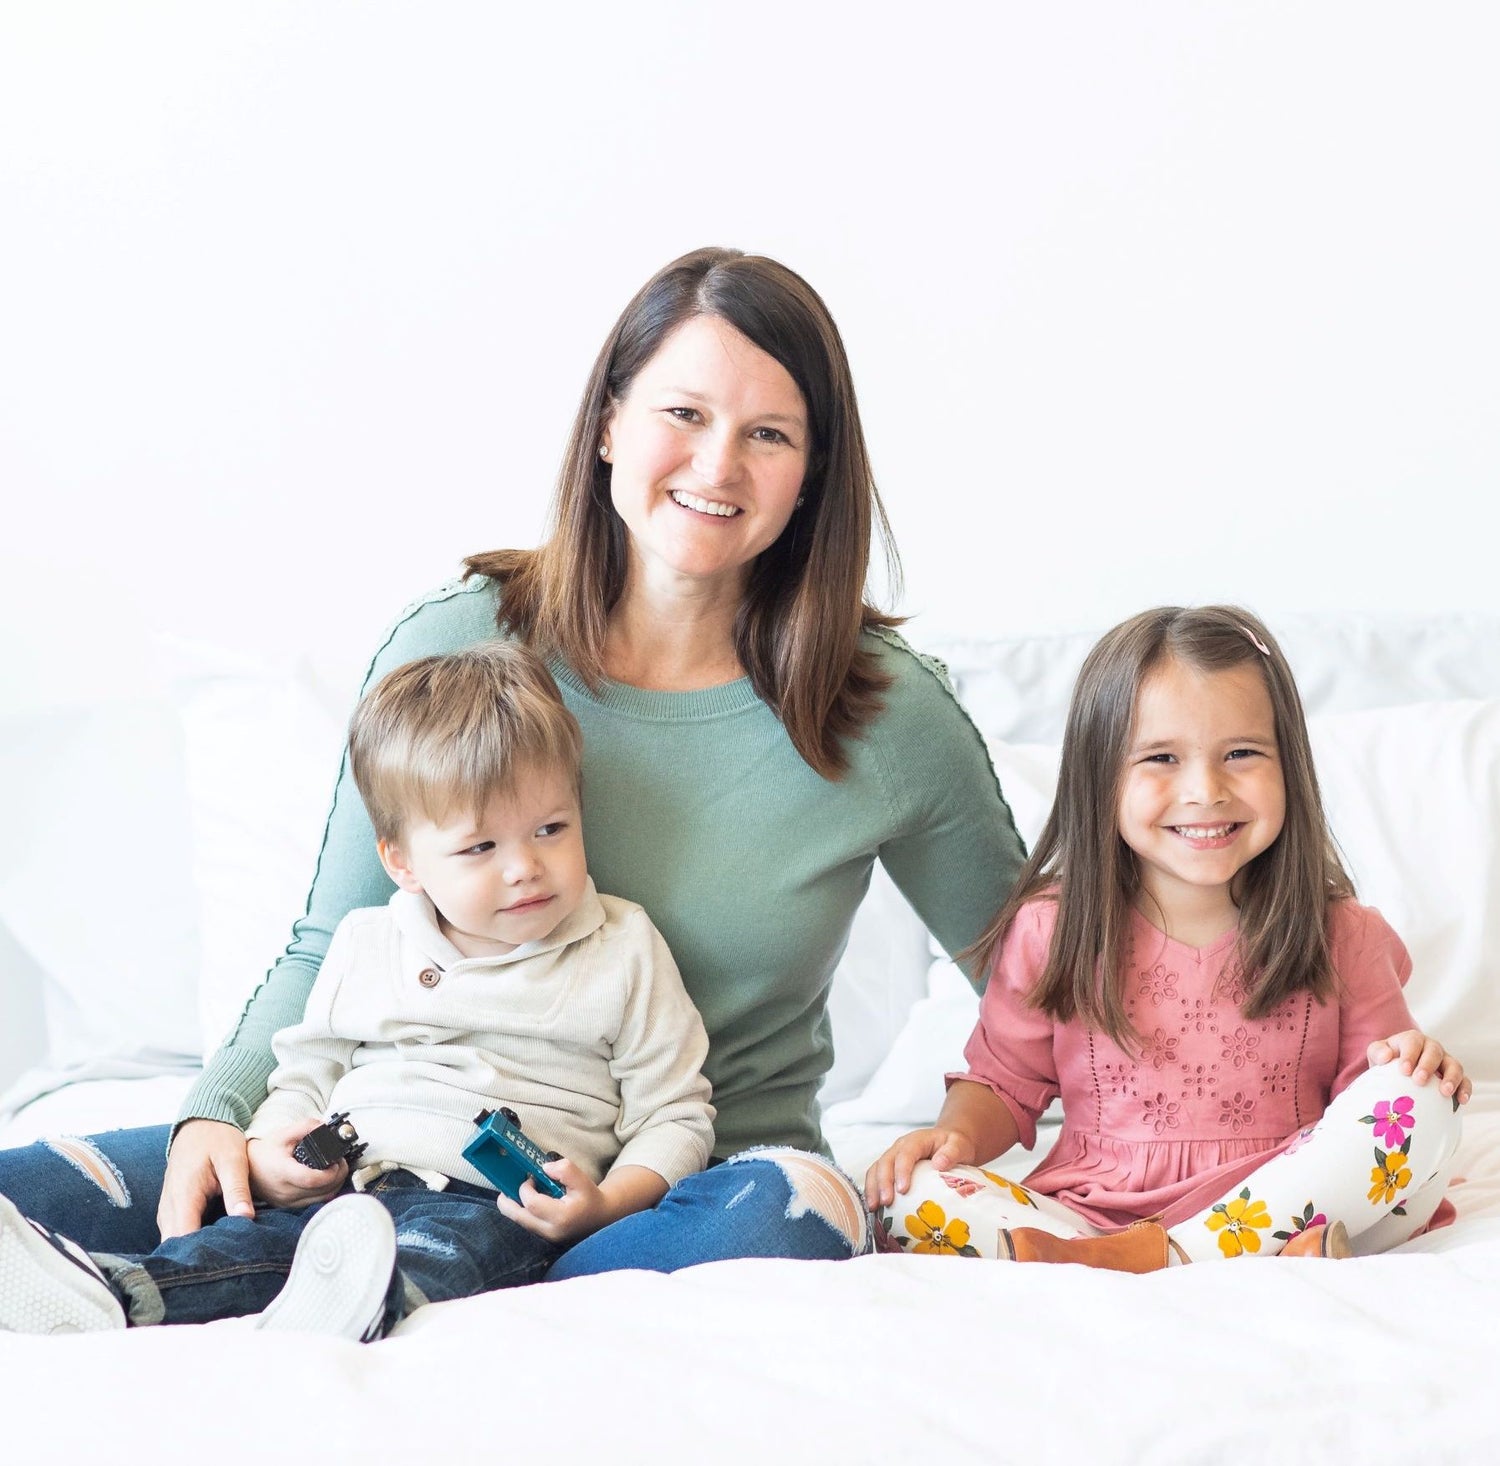 Registered Dietitian, Food Allergy Mom & Creator, Wild Little Berry with her two children